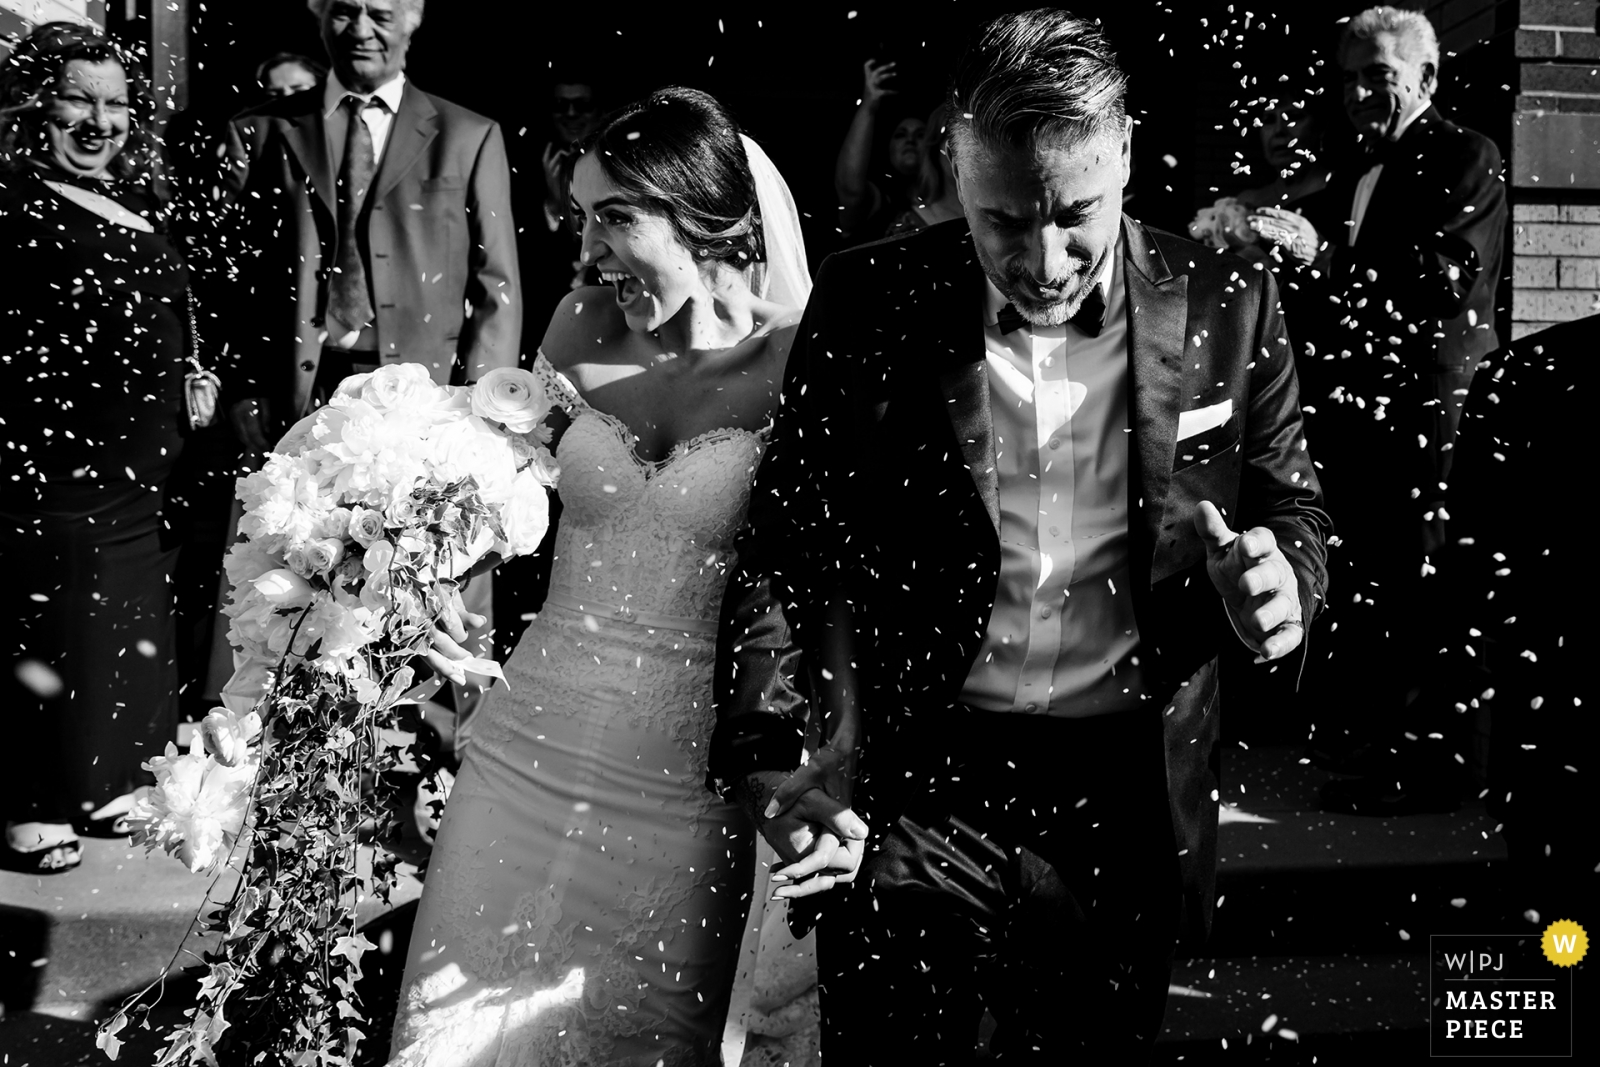 Award Winning New Hampshire Wedding Photographer my image from P + M's Greek Orthodox Wedding in Boston, Massachusetts where they exited the ceremony under a shower of bird seed!